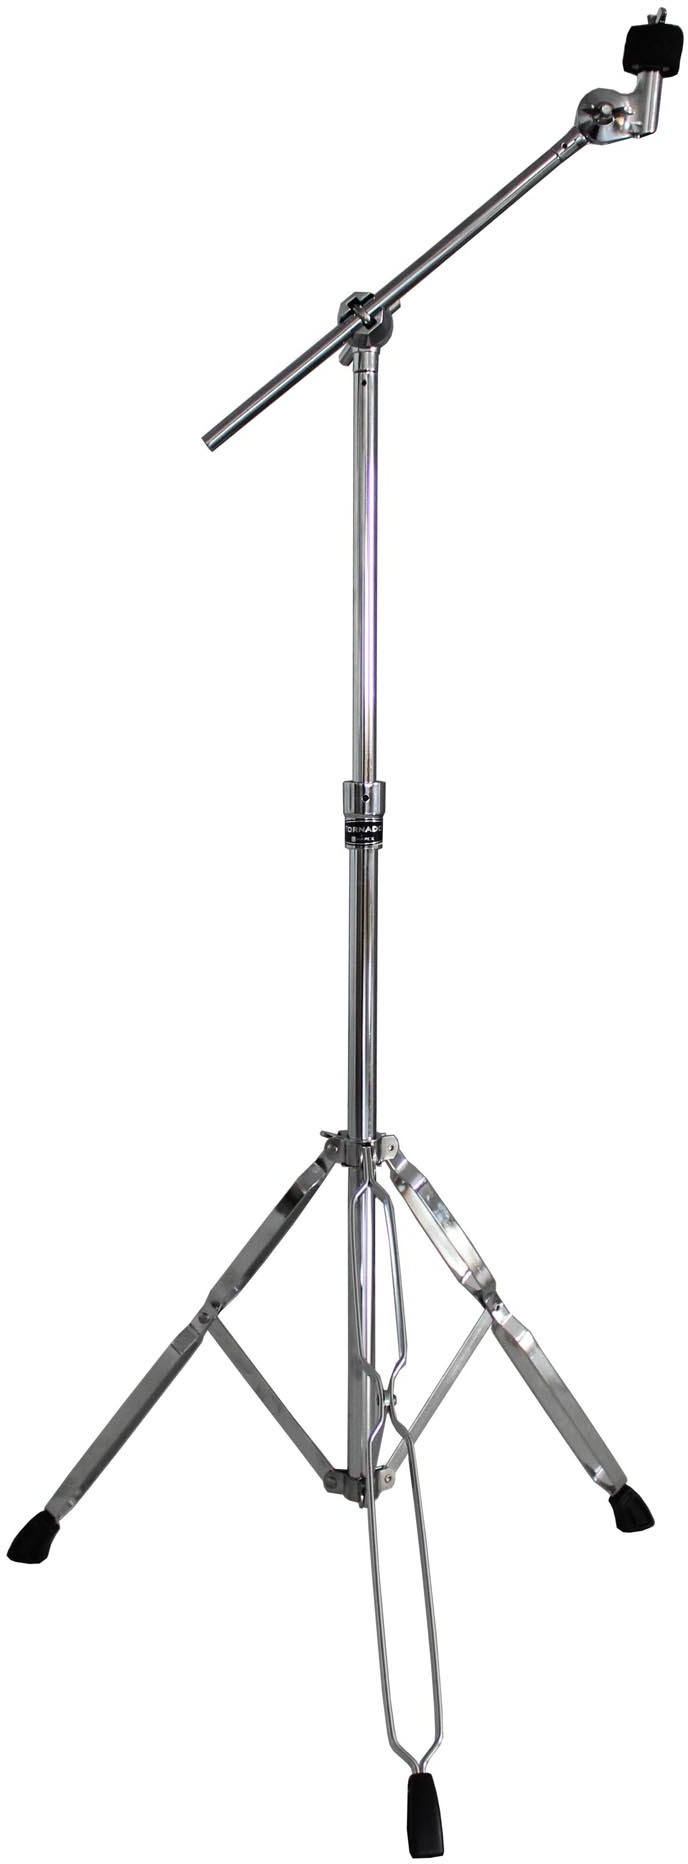 Mapex Tornado Cymbal Stand - Pied De Cymbale - Main picture